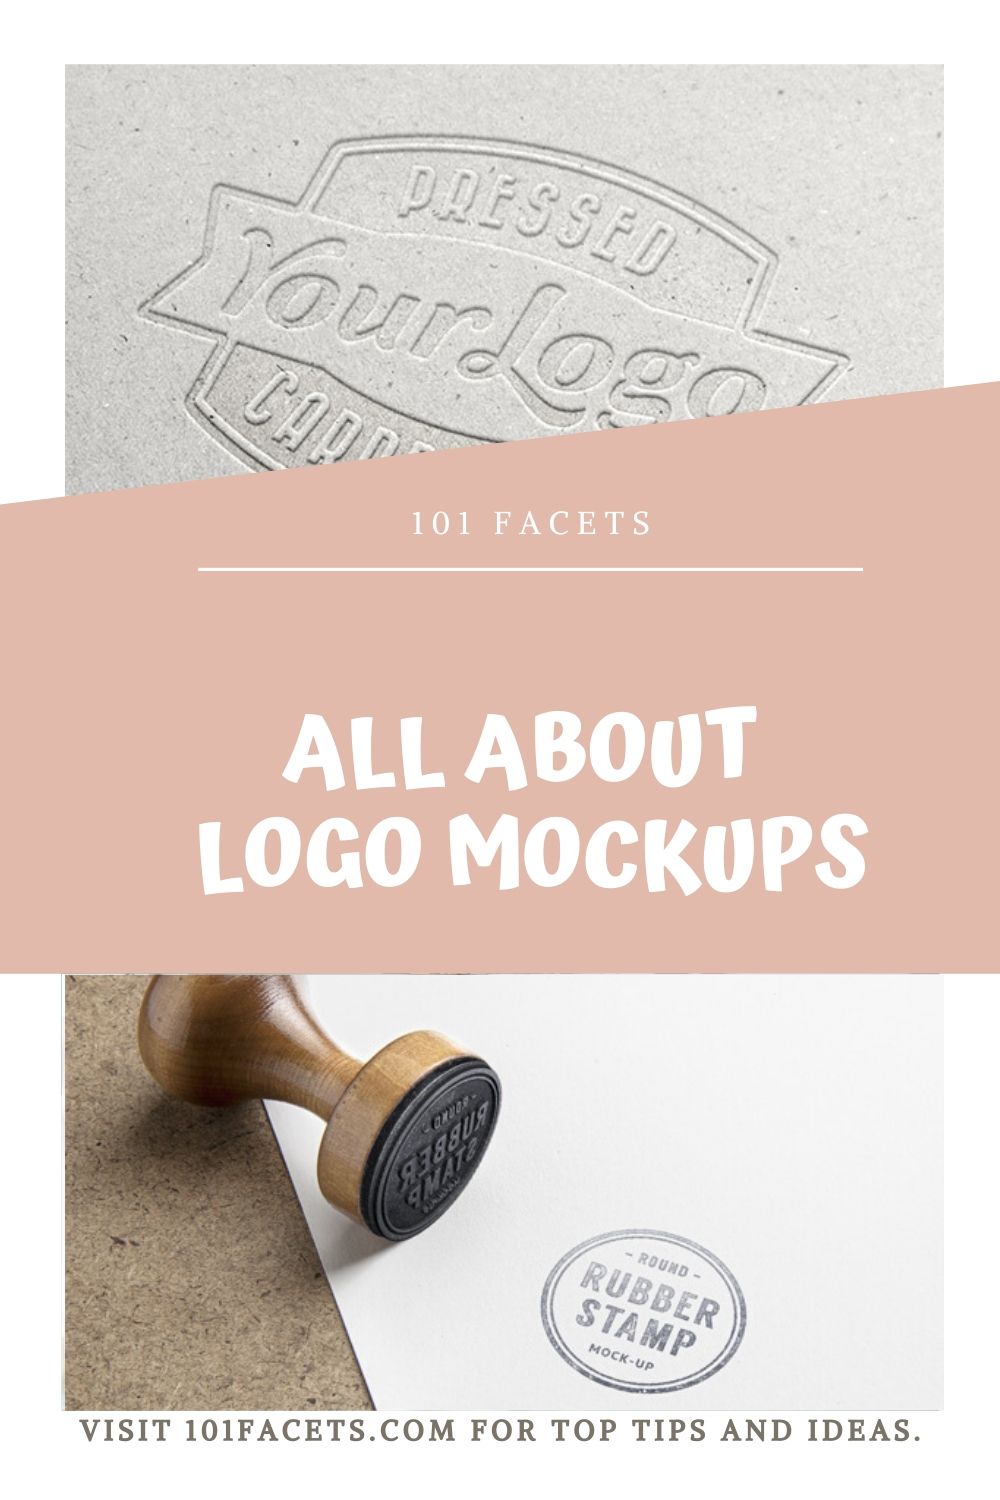 All About Logo Mockups